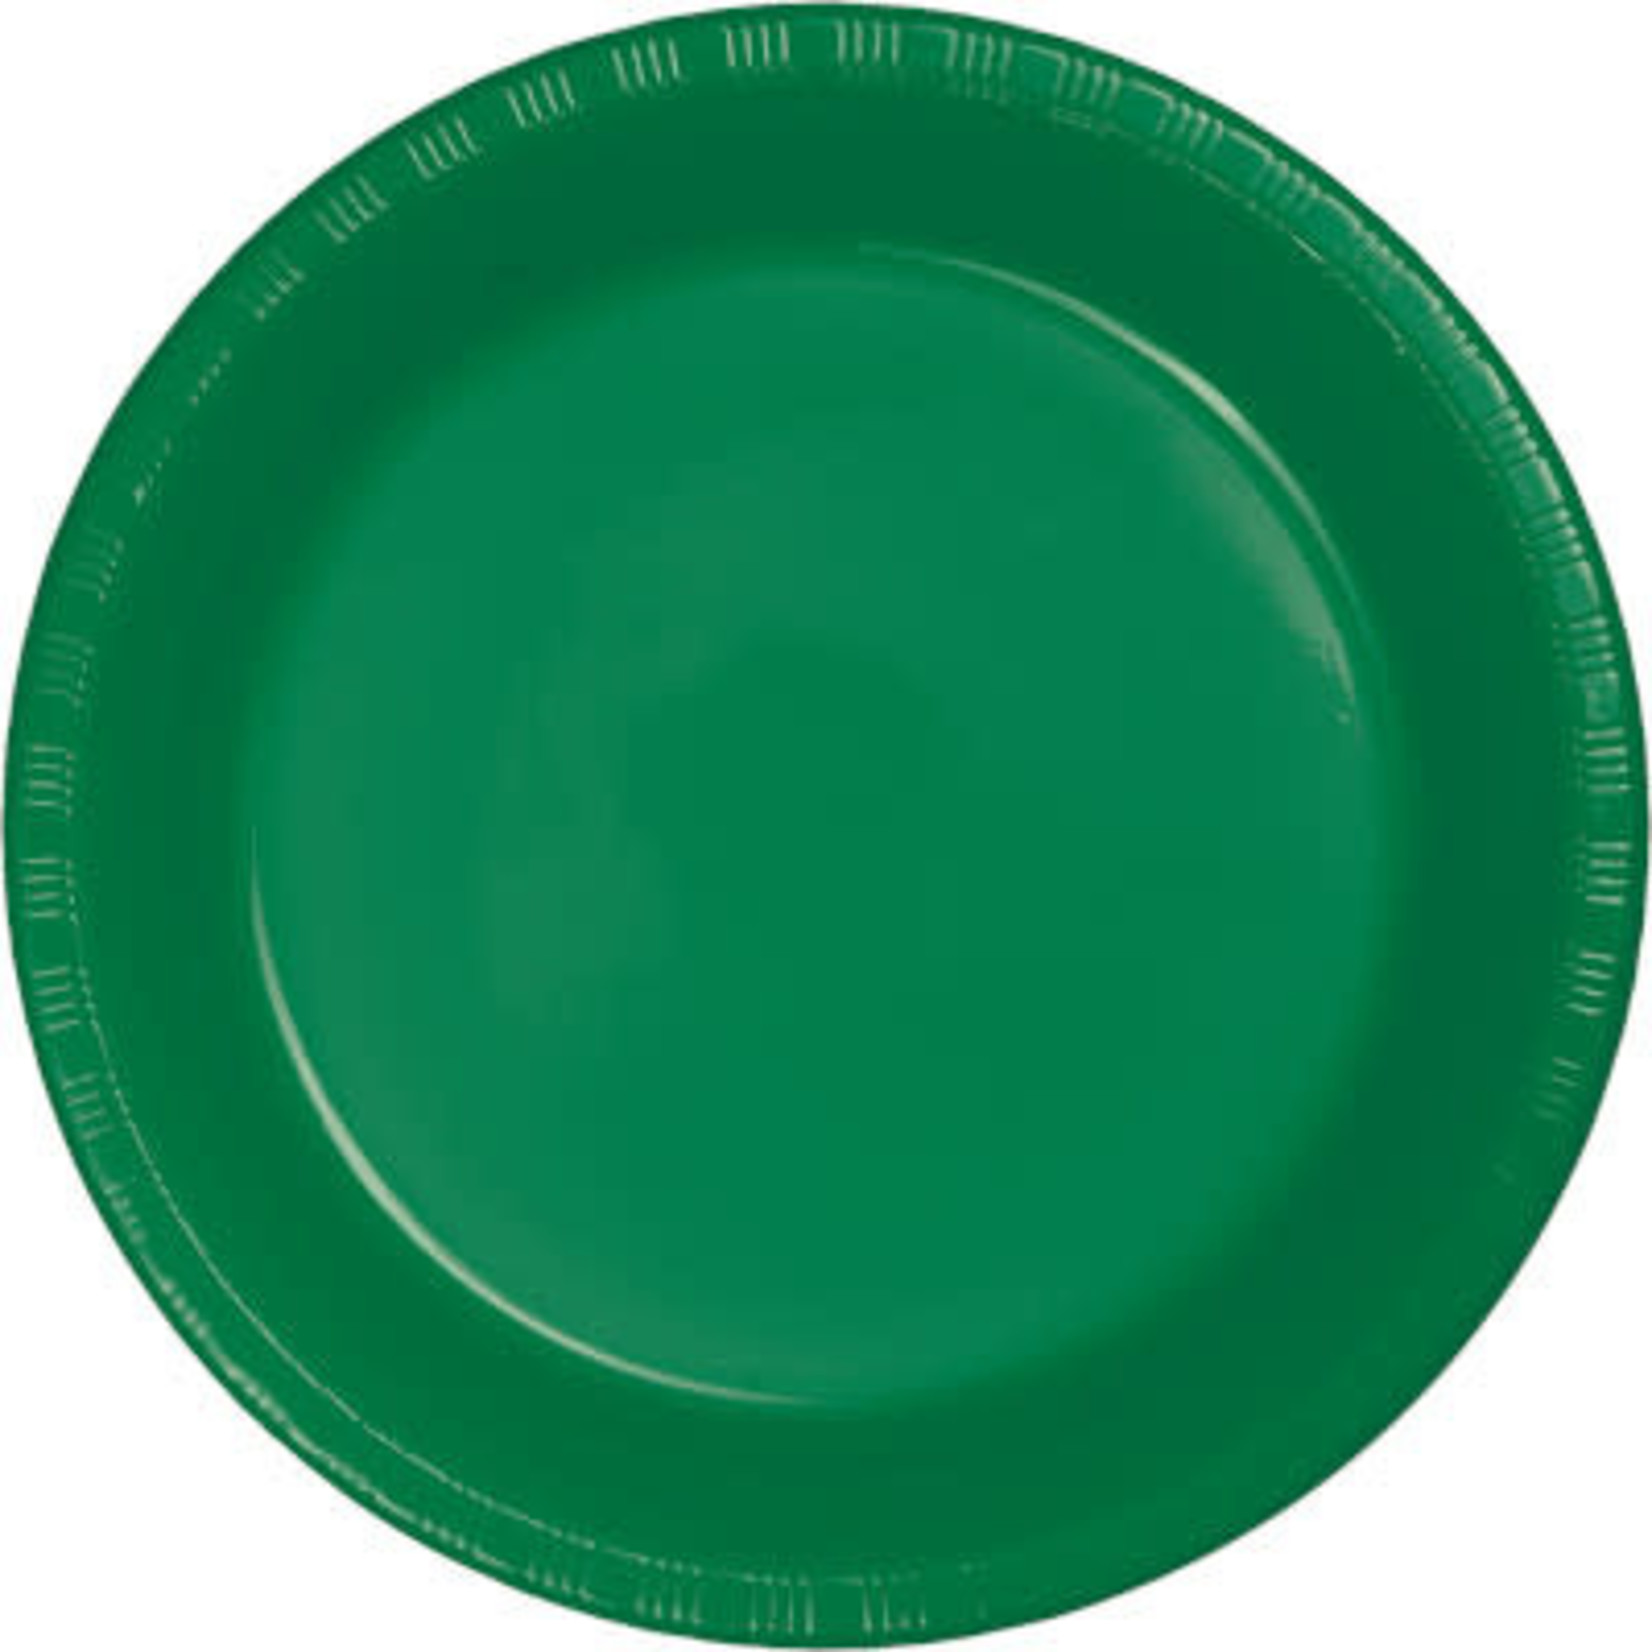 Touch of Color 10" Emerald Green Plastic Banquet Plates - 20ct.